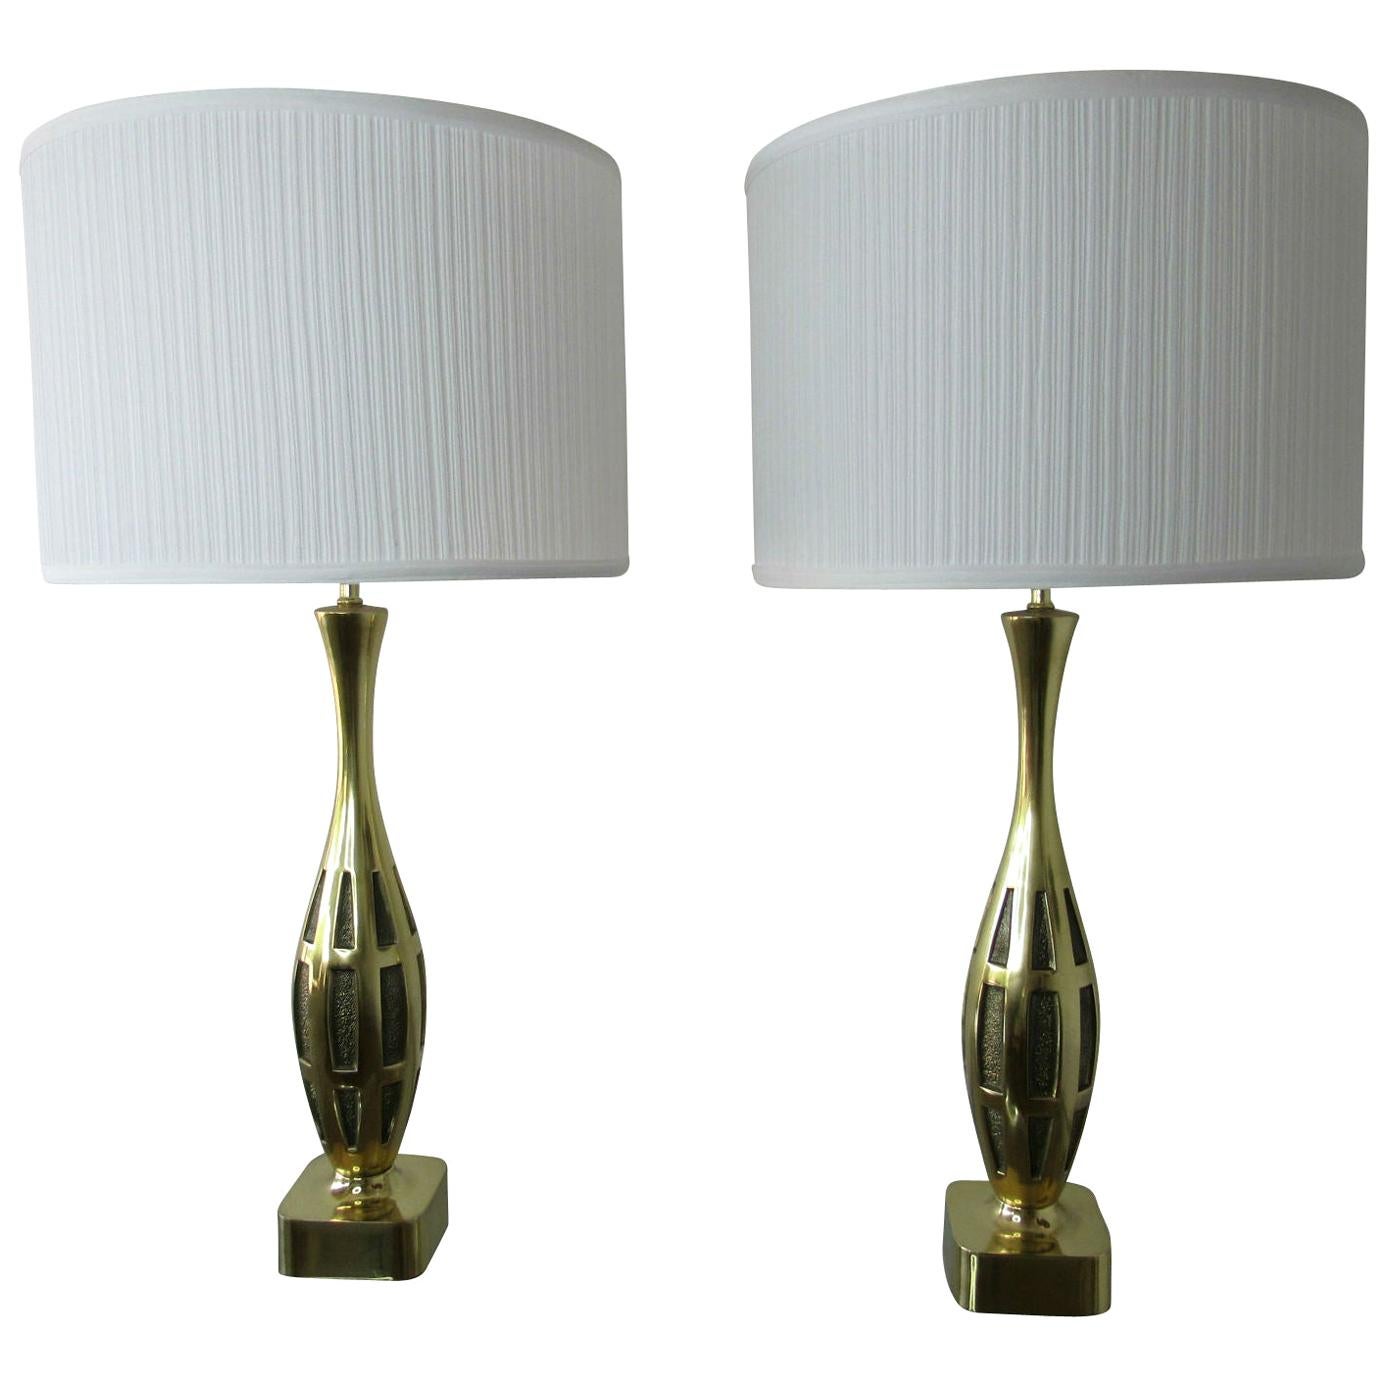 Tony Paul Midcentury Modern Brass Table Lamps For Sale